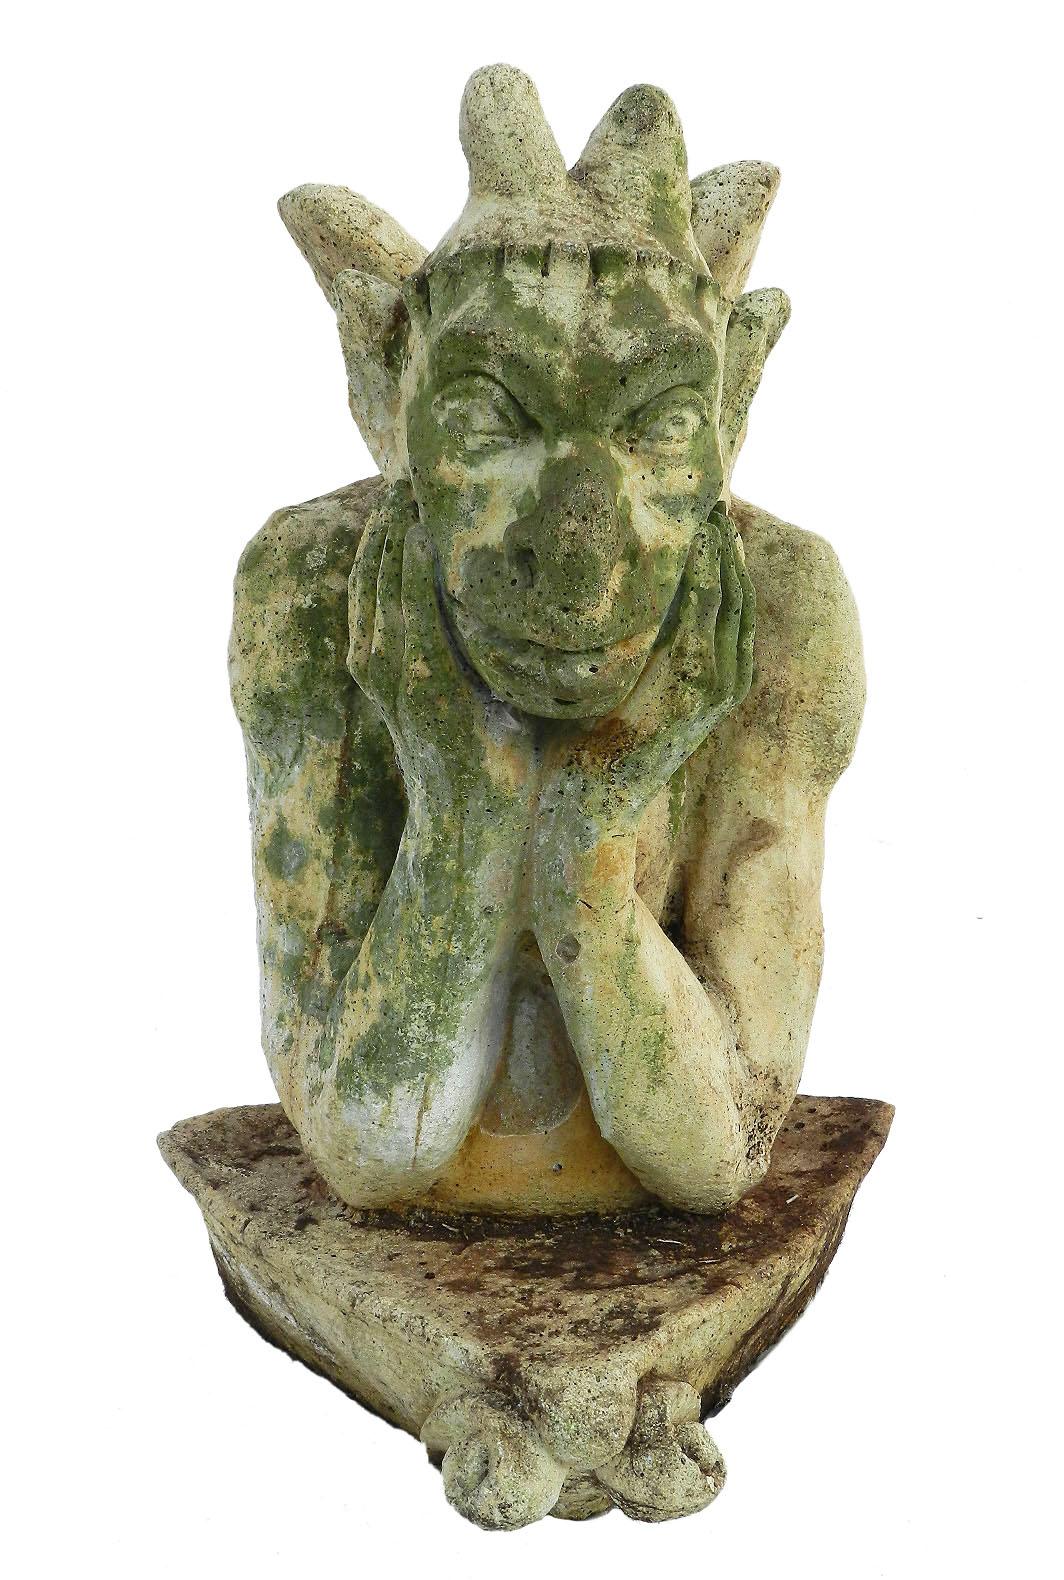 Gargoyle cast garden statue vintage, 20th century
Gloriously weathered
Good and heavy!
Inspired by the Gargoyle at Notre Dame Paris
Showing superb signs of age and wear after years in a garden.






 